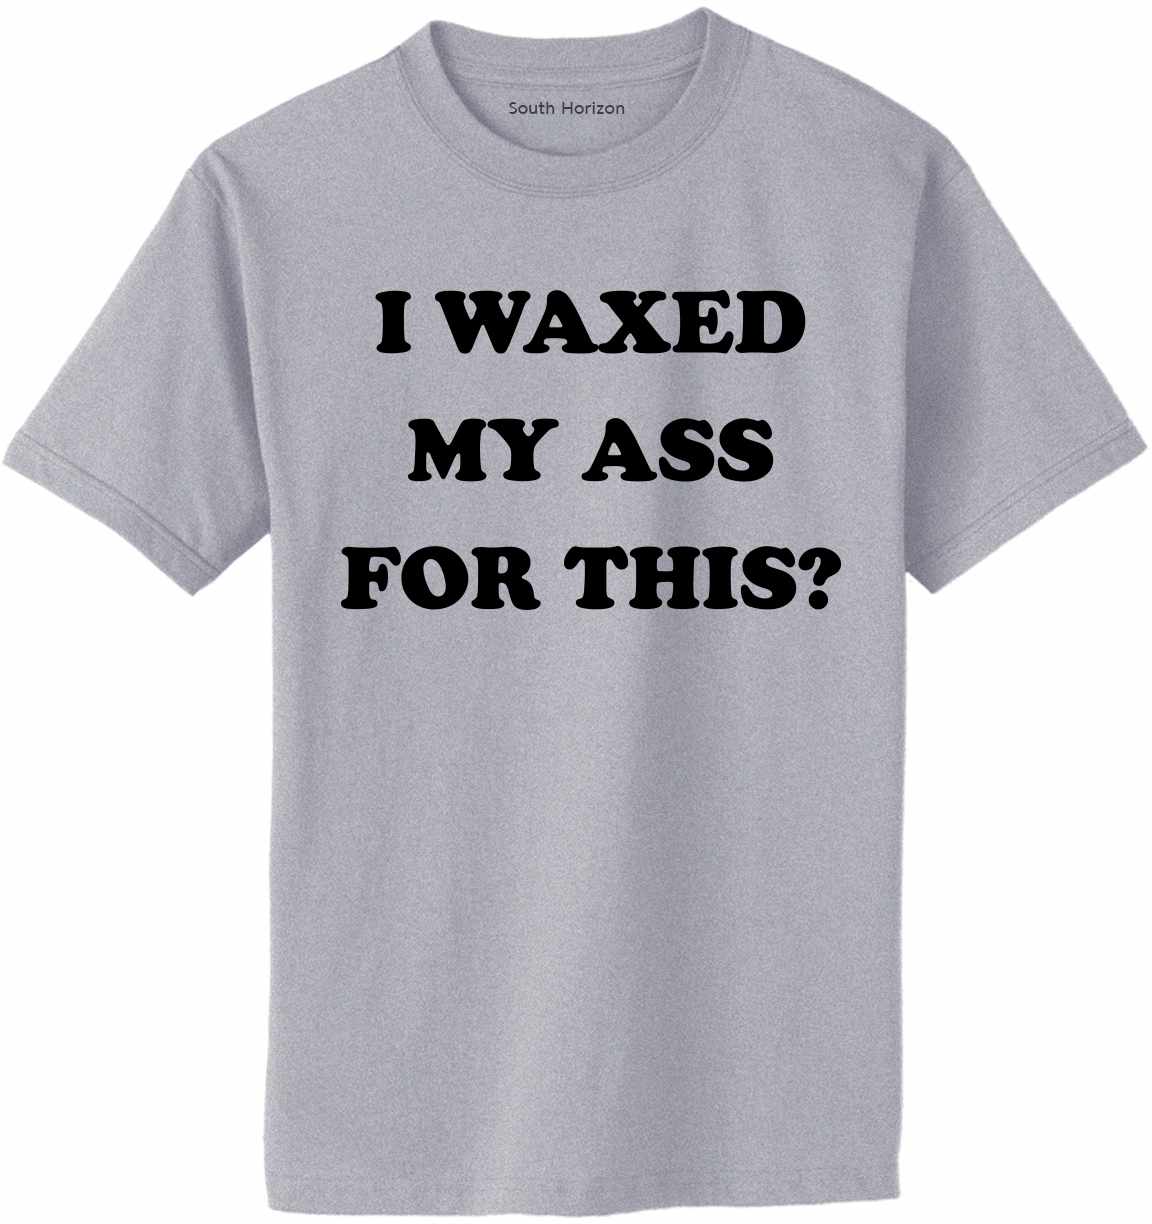 I Waxed My Ass For This on Adult T-Shirt (#1169-1)